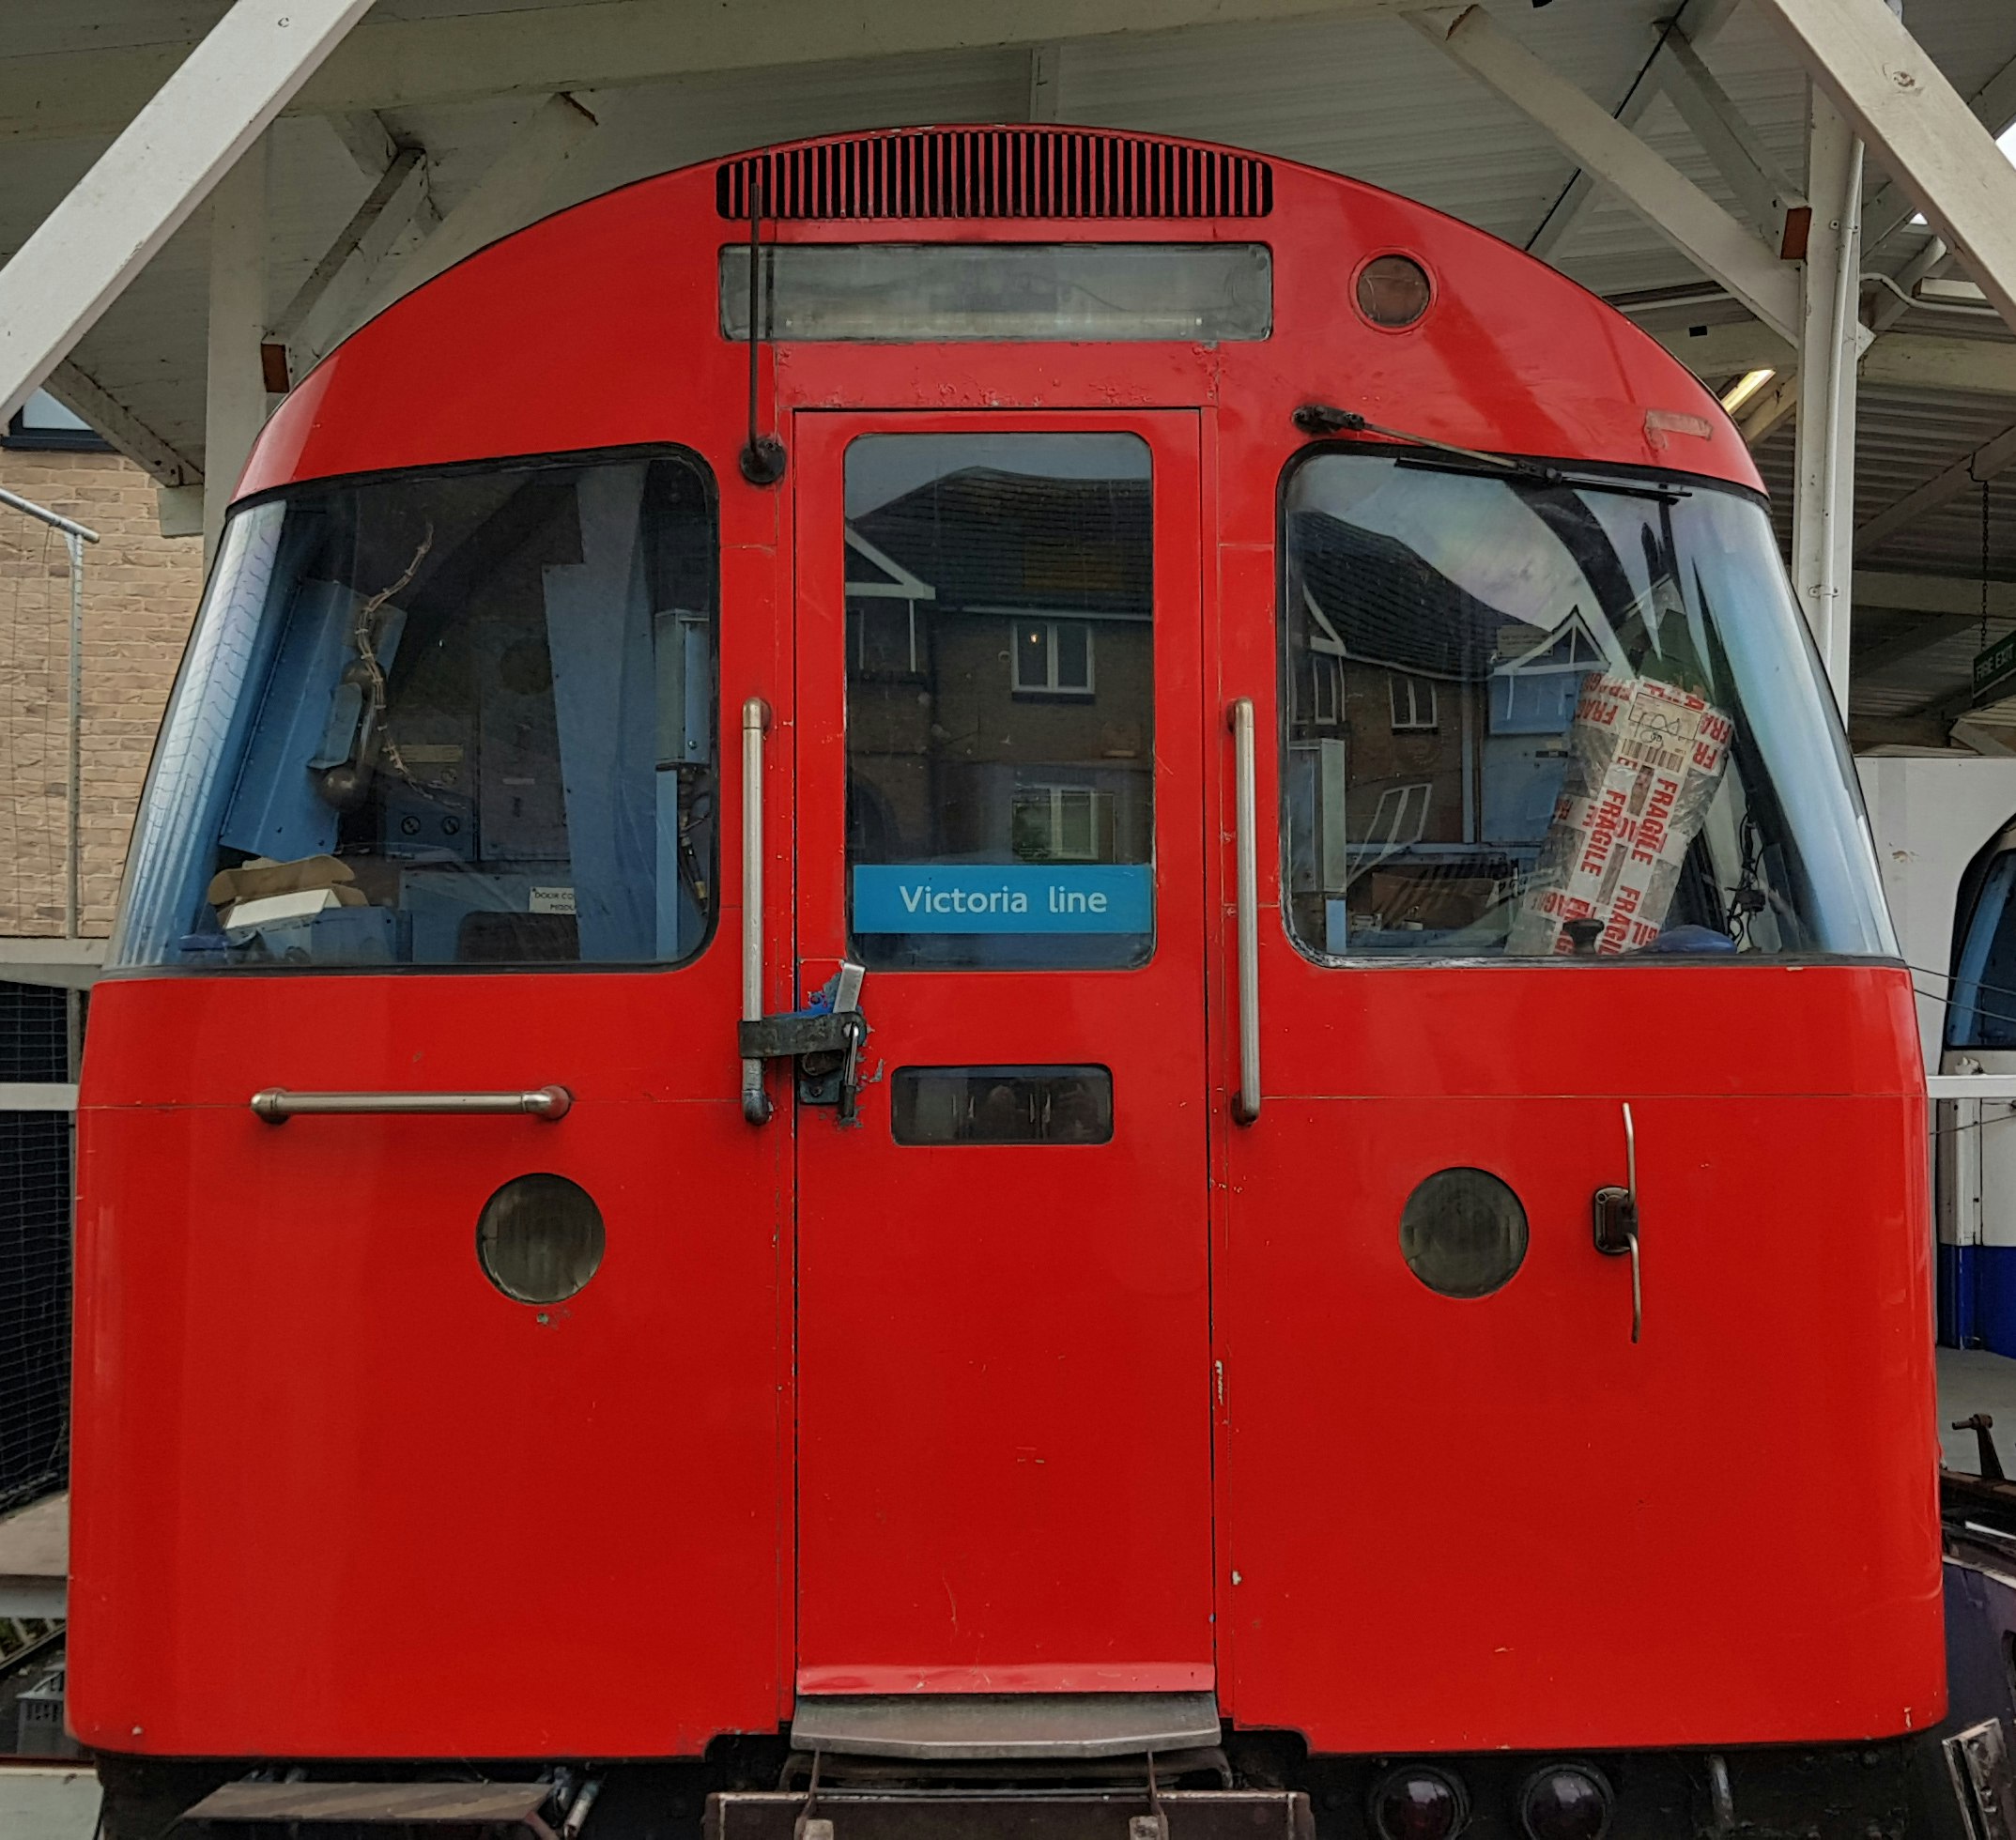 Walthamstow Pumphouse Museum - Victoria Line Underground Tube Carriage image 1